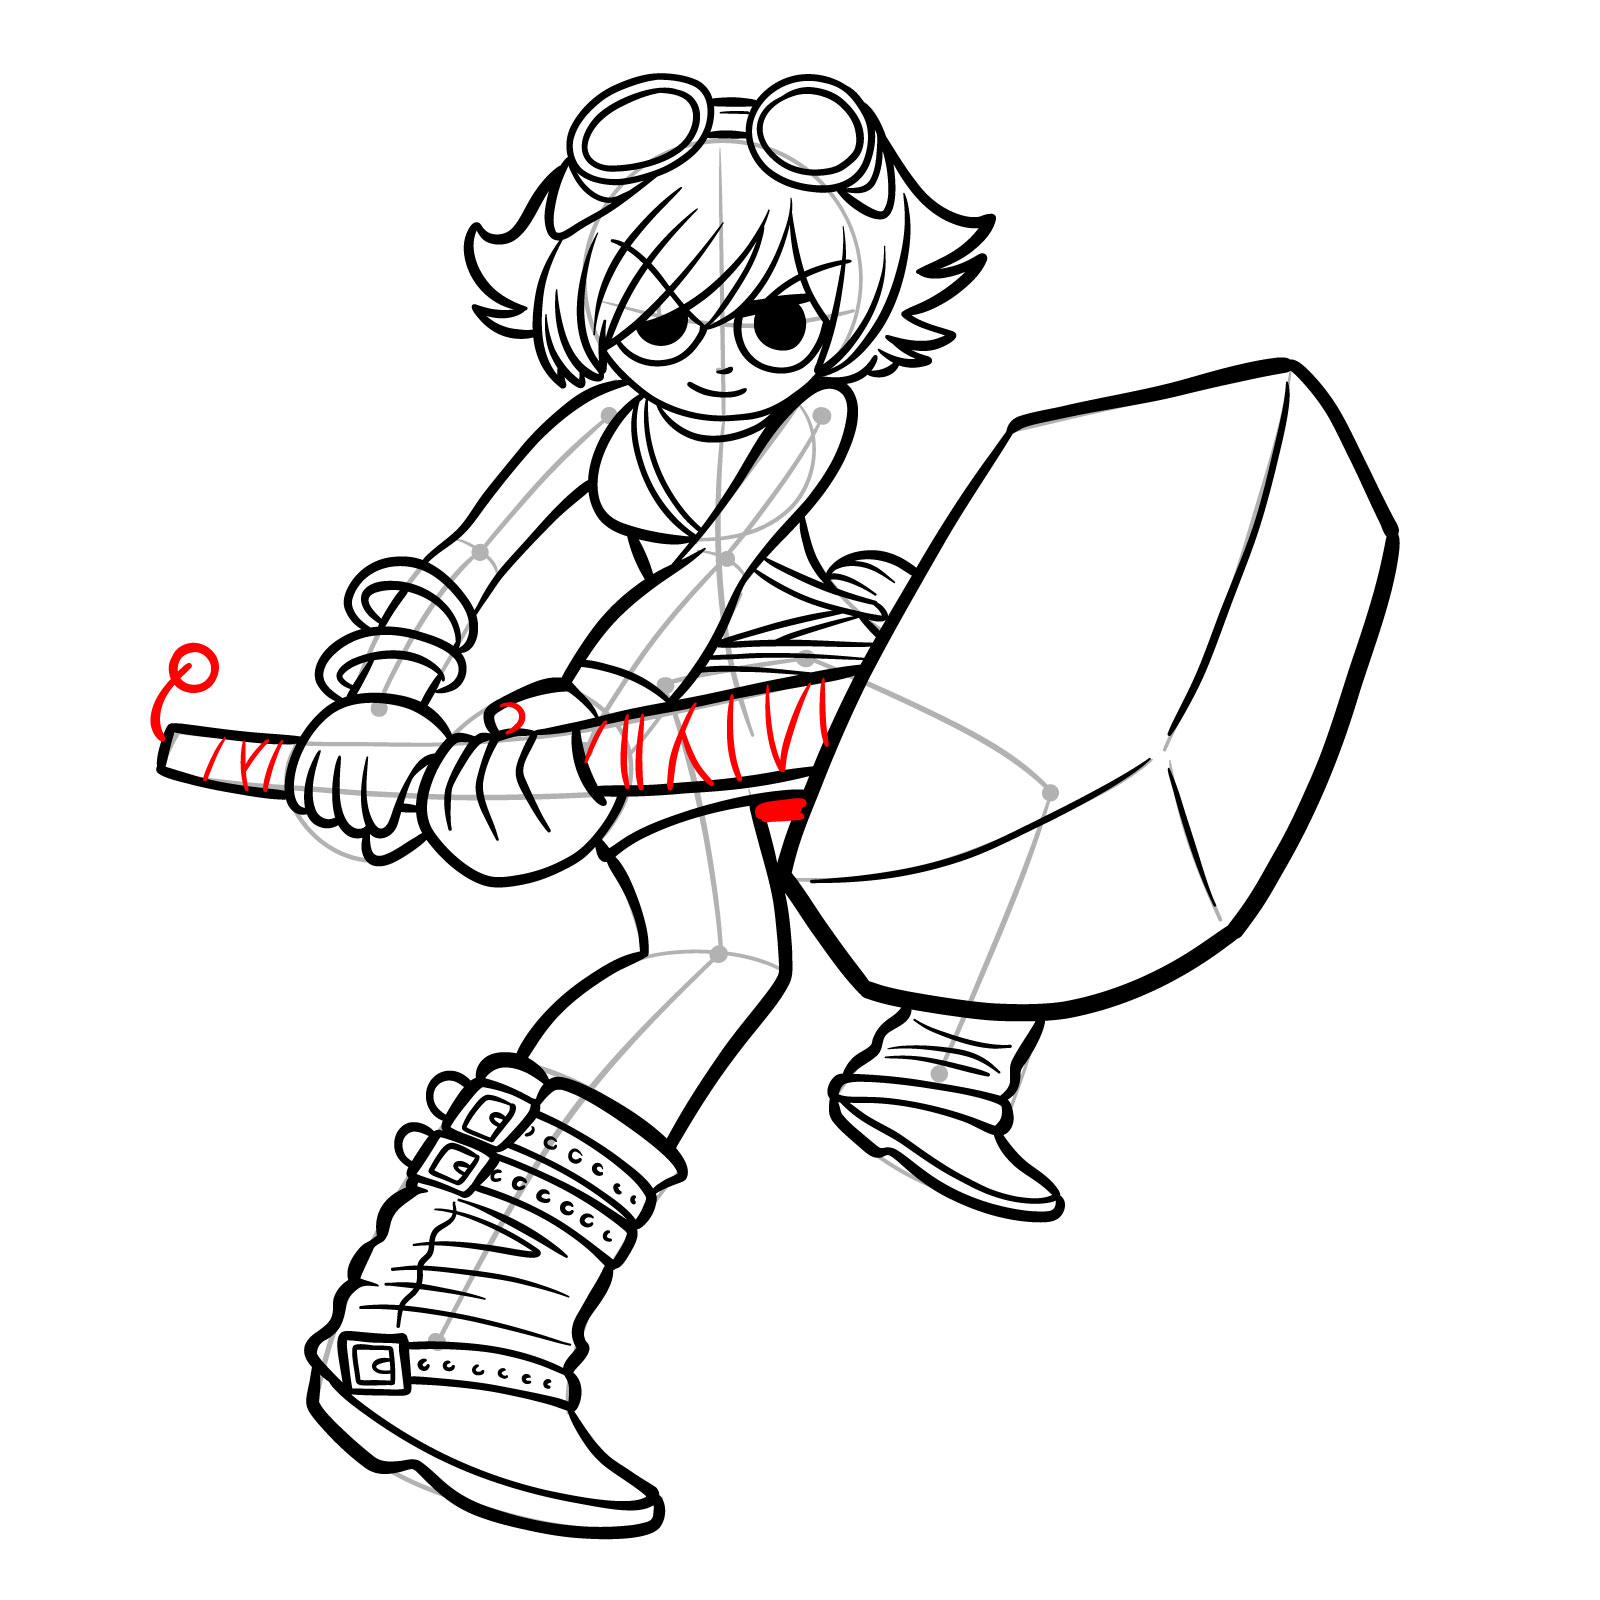 Ramona Flowers with her Large Hammer drawing - easy step-by-step guide - step 22